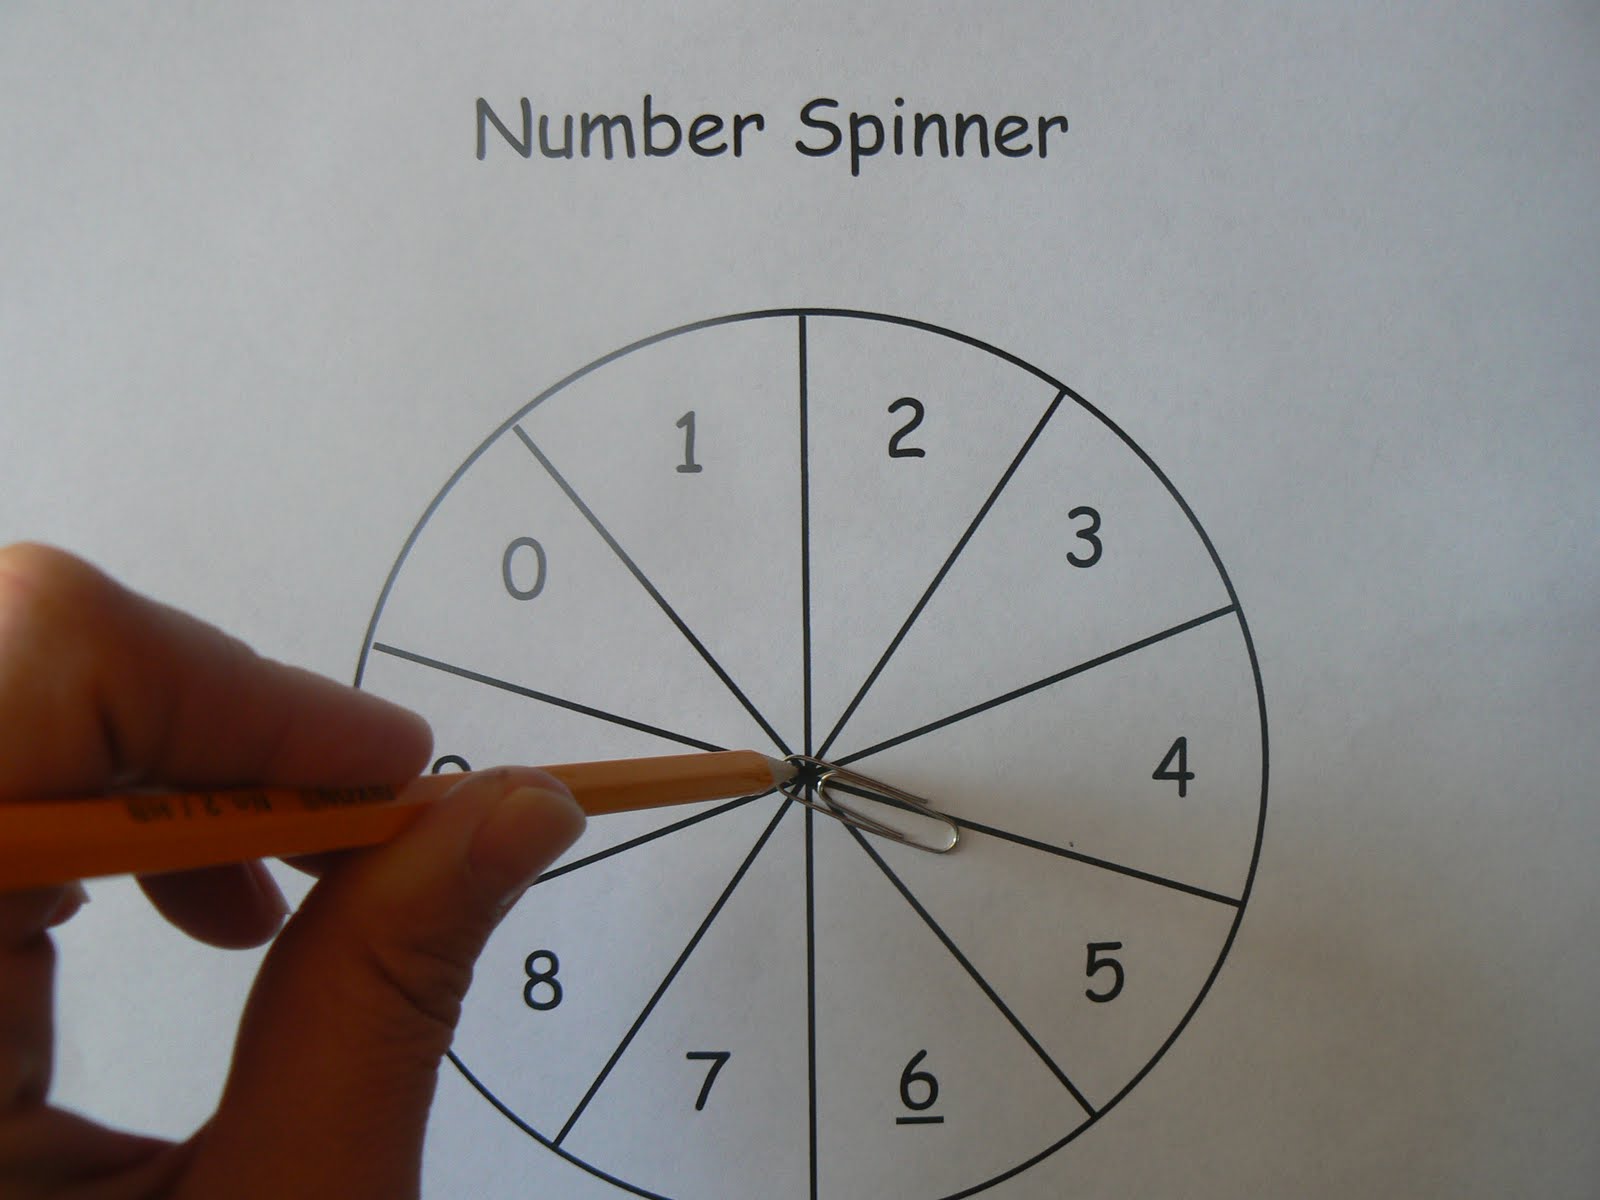 Had a spin. Make a Spinner. Спиннер чертеж. Spinner with numbers. Spinner vc850 чертеж.